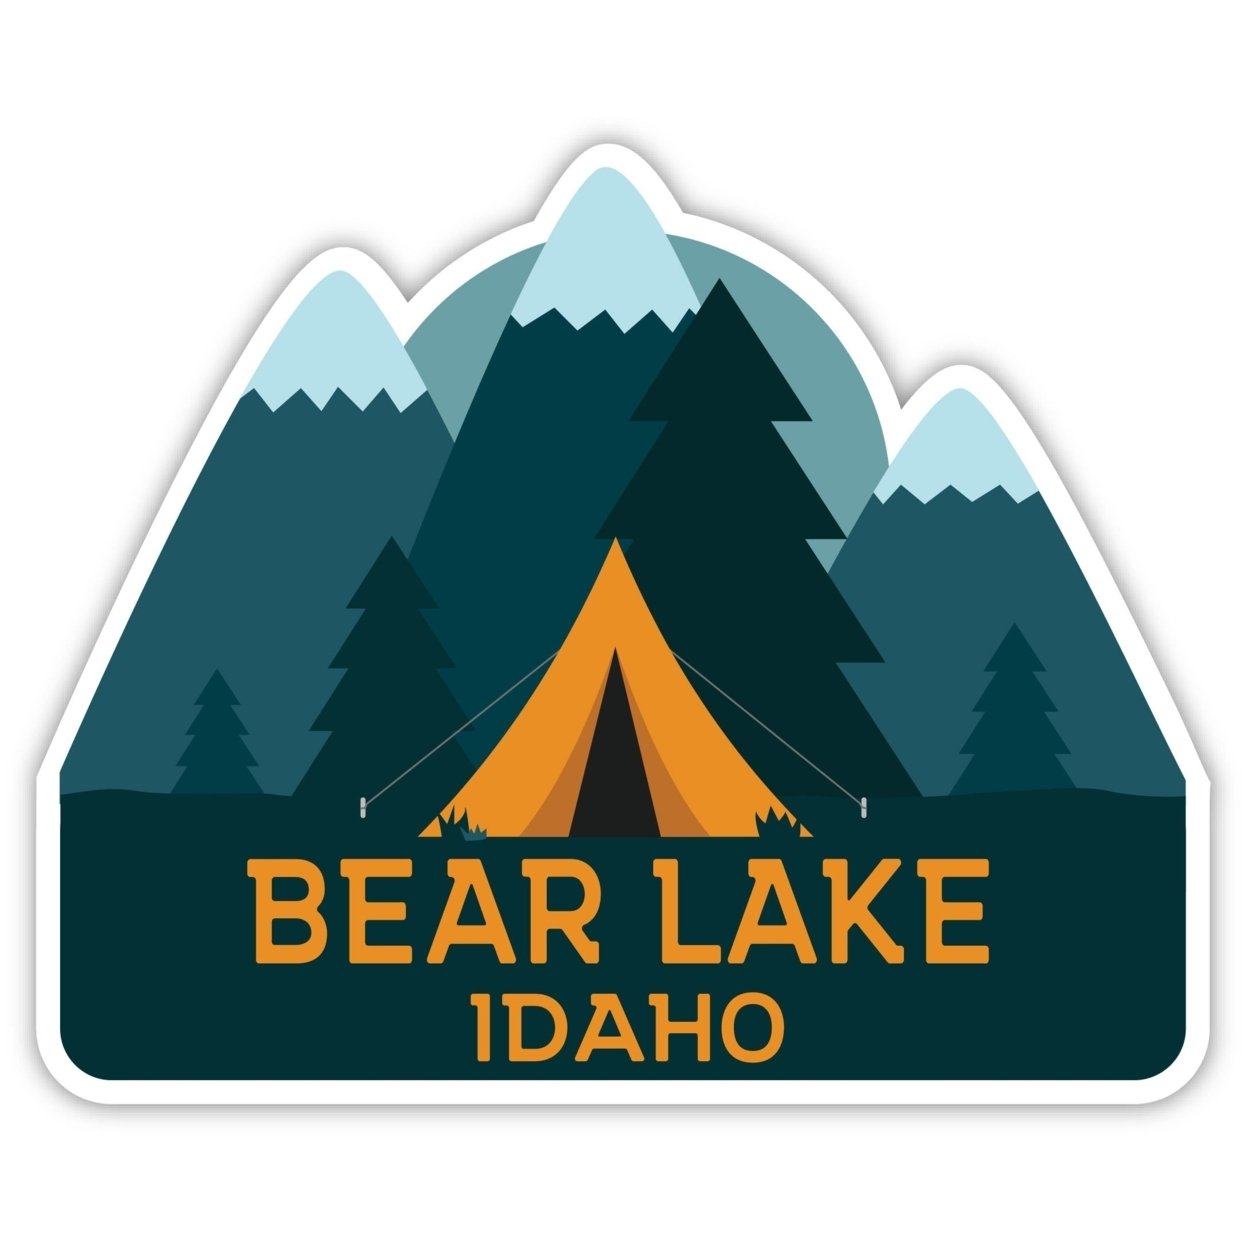 Bear Lake Idaho Souvenir Decorative Stickers (Choose Theme And Size) - 4-Pack, 2-Inch, Tent